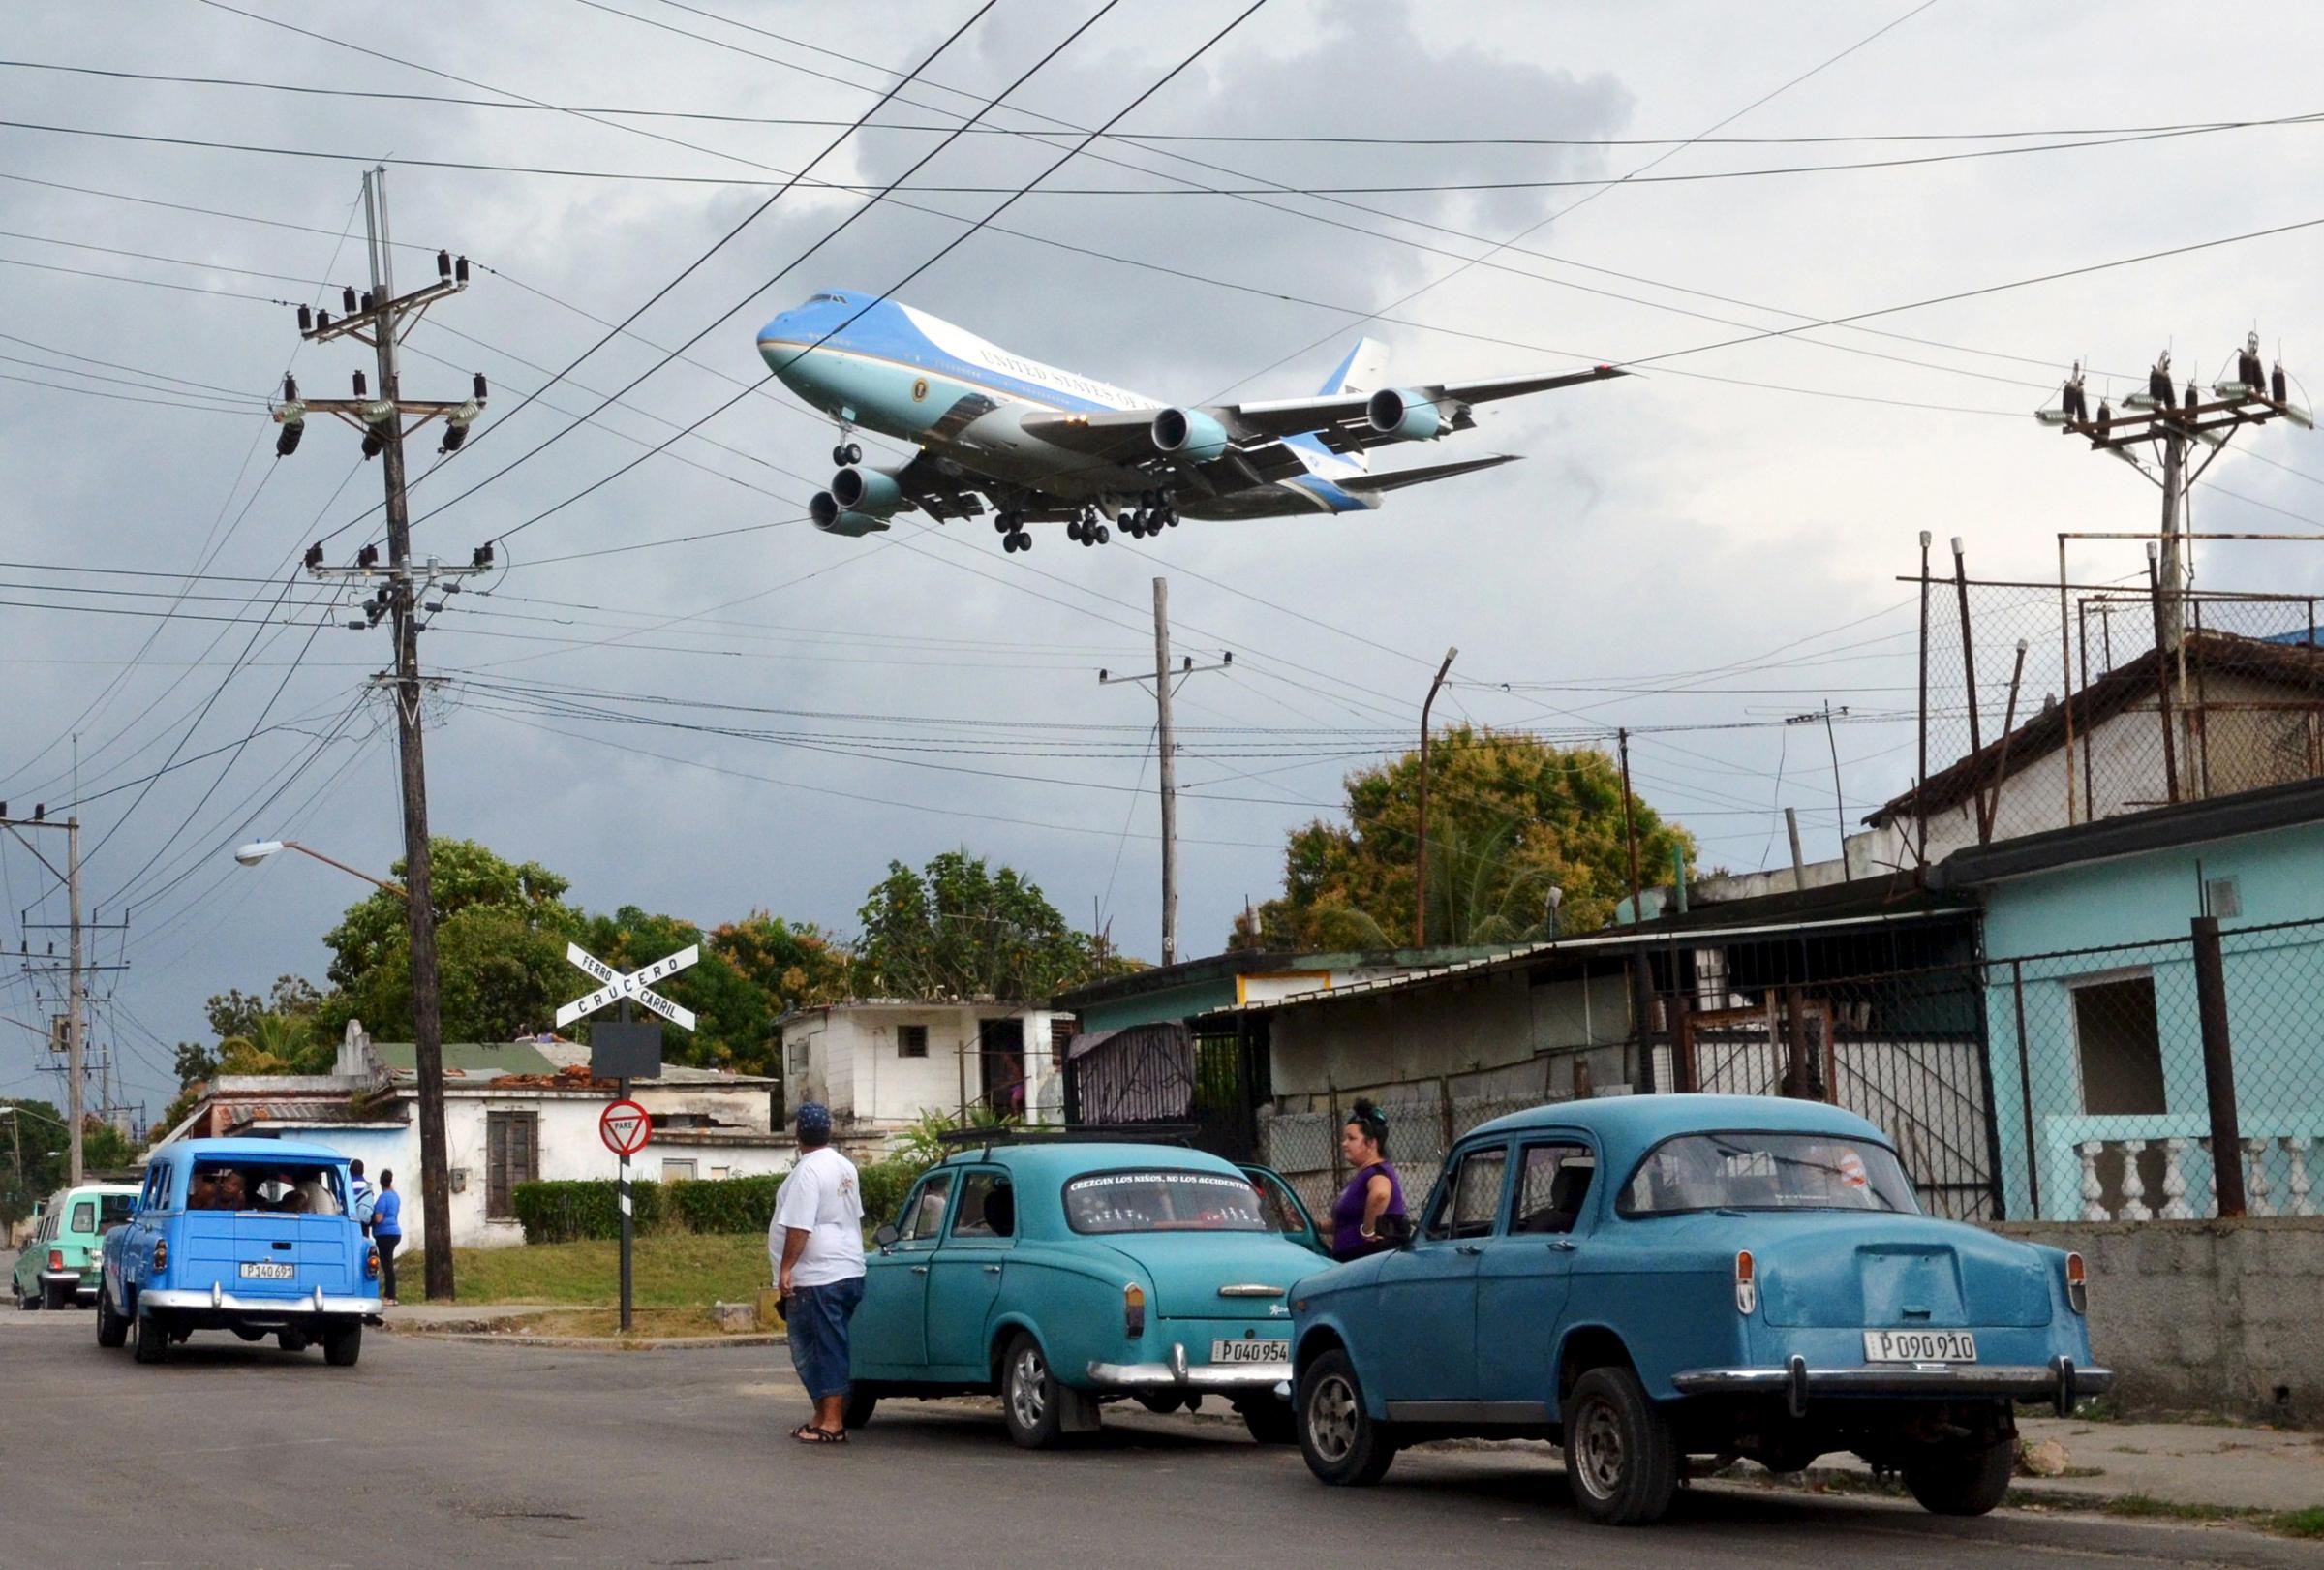 Air Force One carrying Obama and his family flies over a neighborhood of Havana as it approaches the runway to land at Havana's international airport